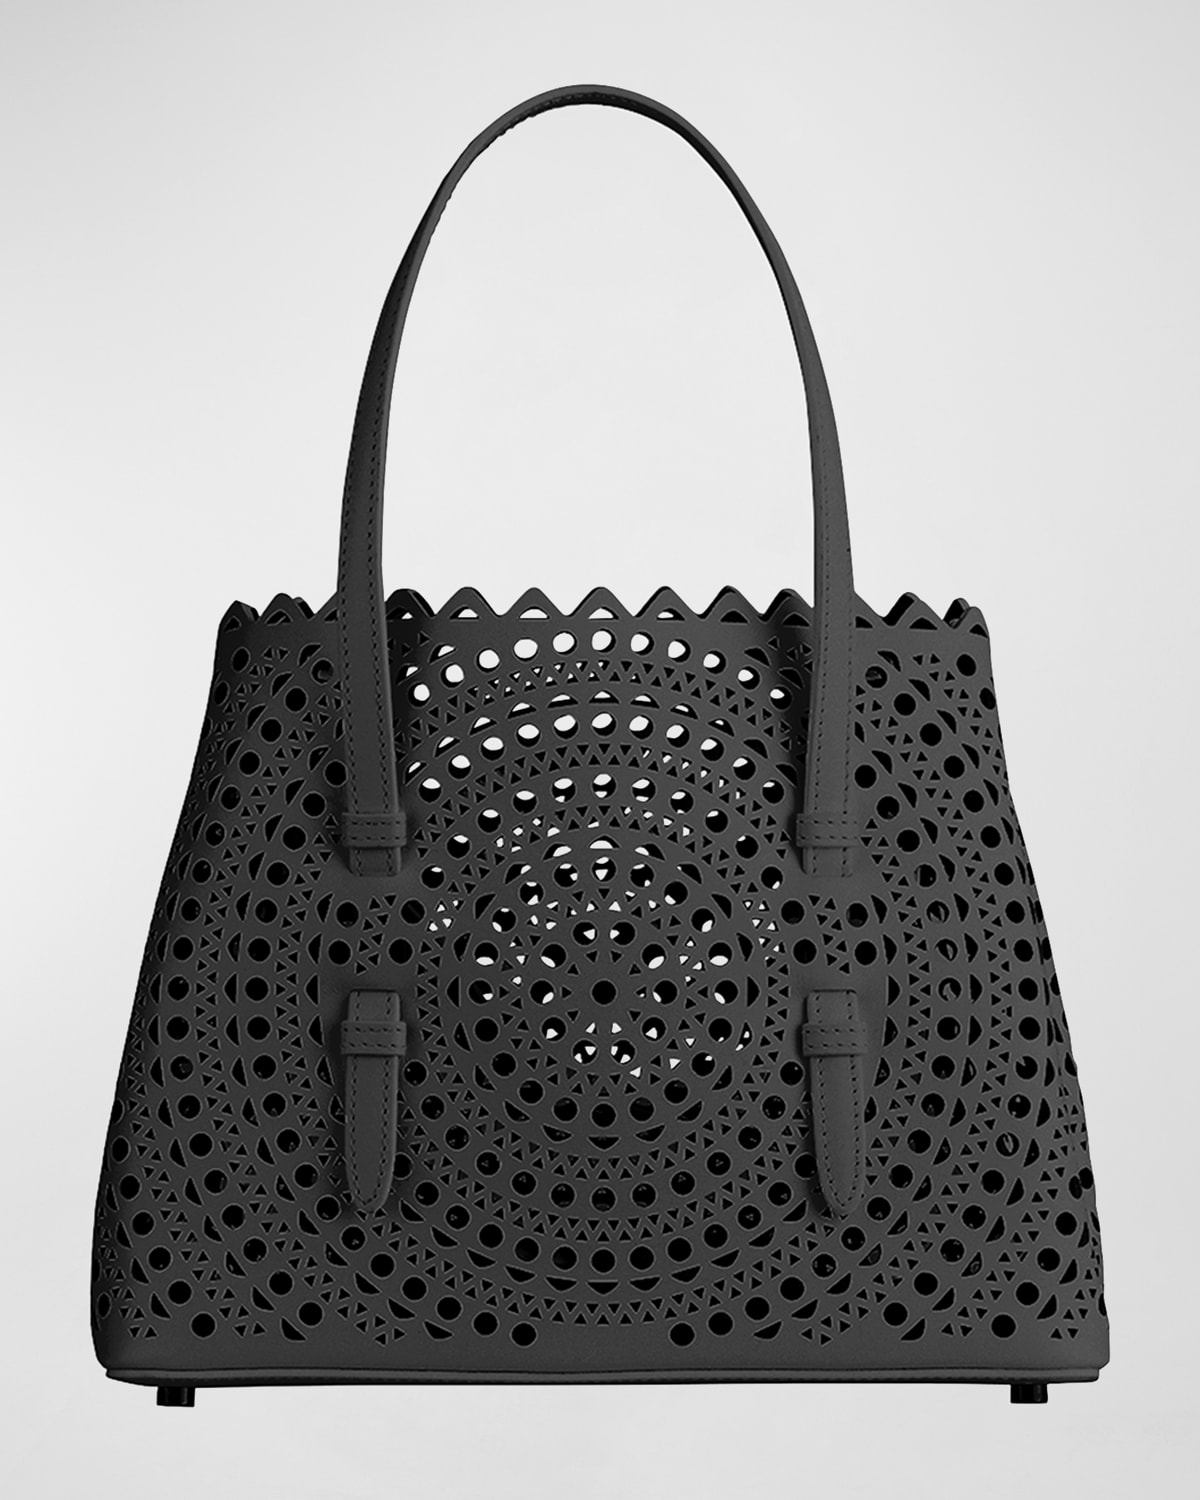 Mina 32 Tote Bag in Vienne Perforated Leather